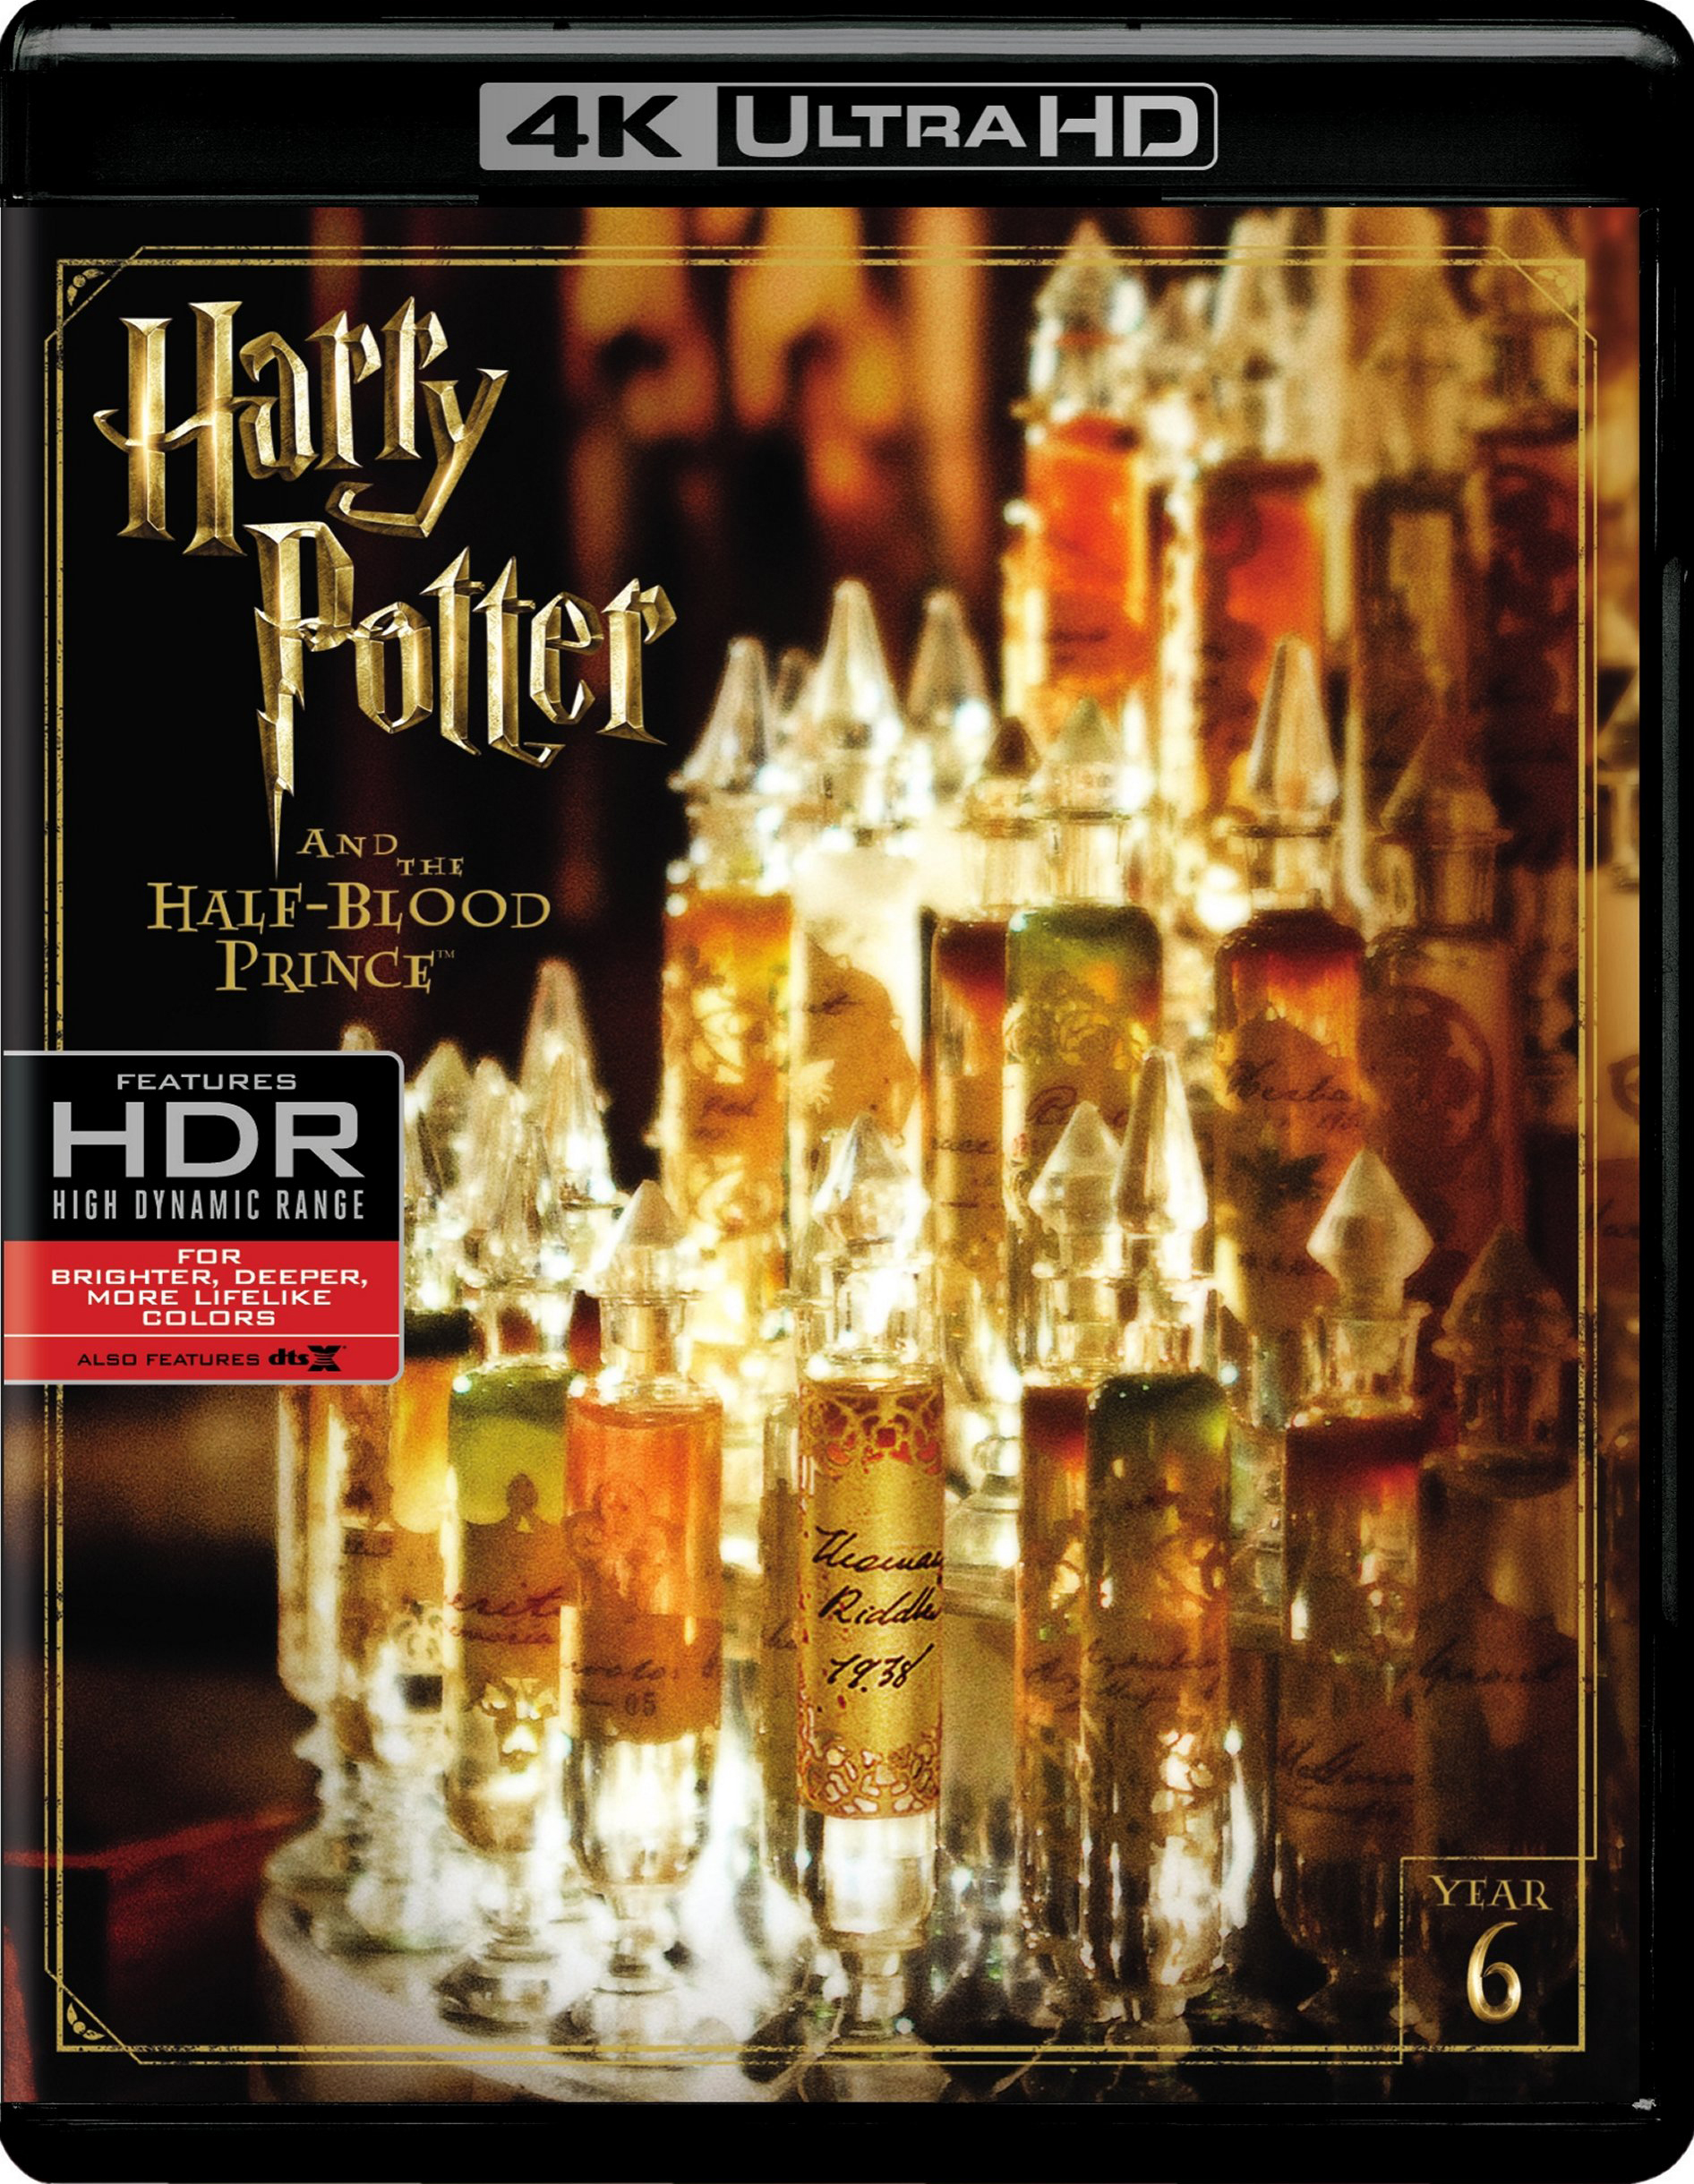 Harry Potter and the Deathly Hallows, Part 2 [4K Ultra HD Blu-ray/Blu-ray]  [2011] - Best Buy